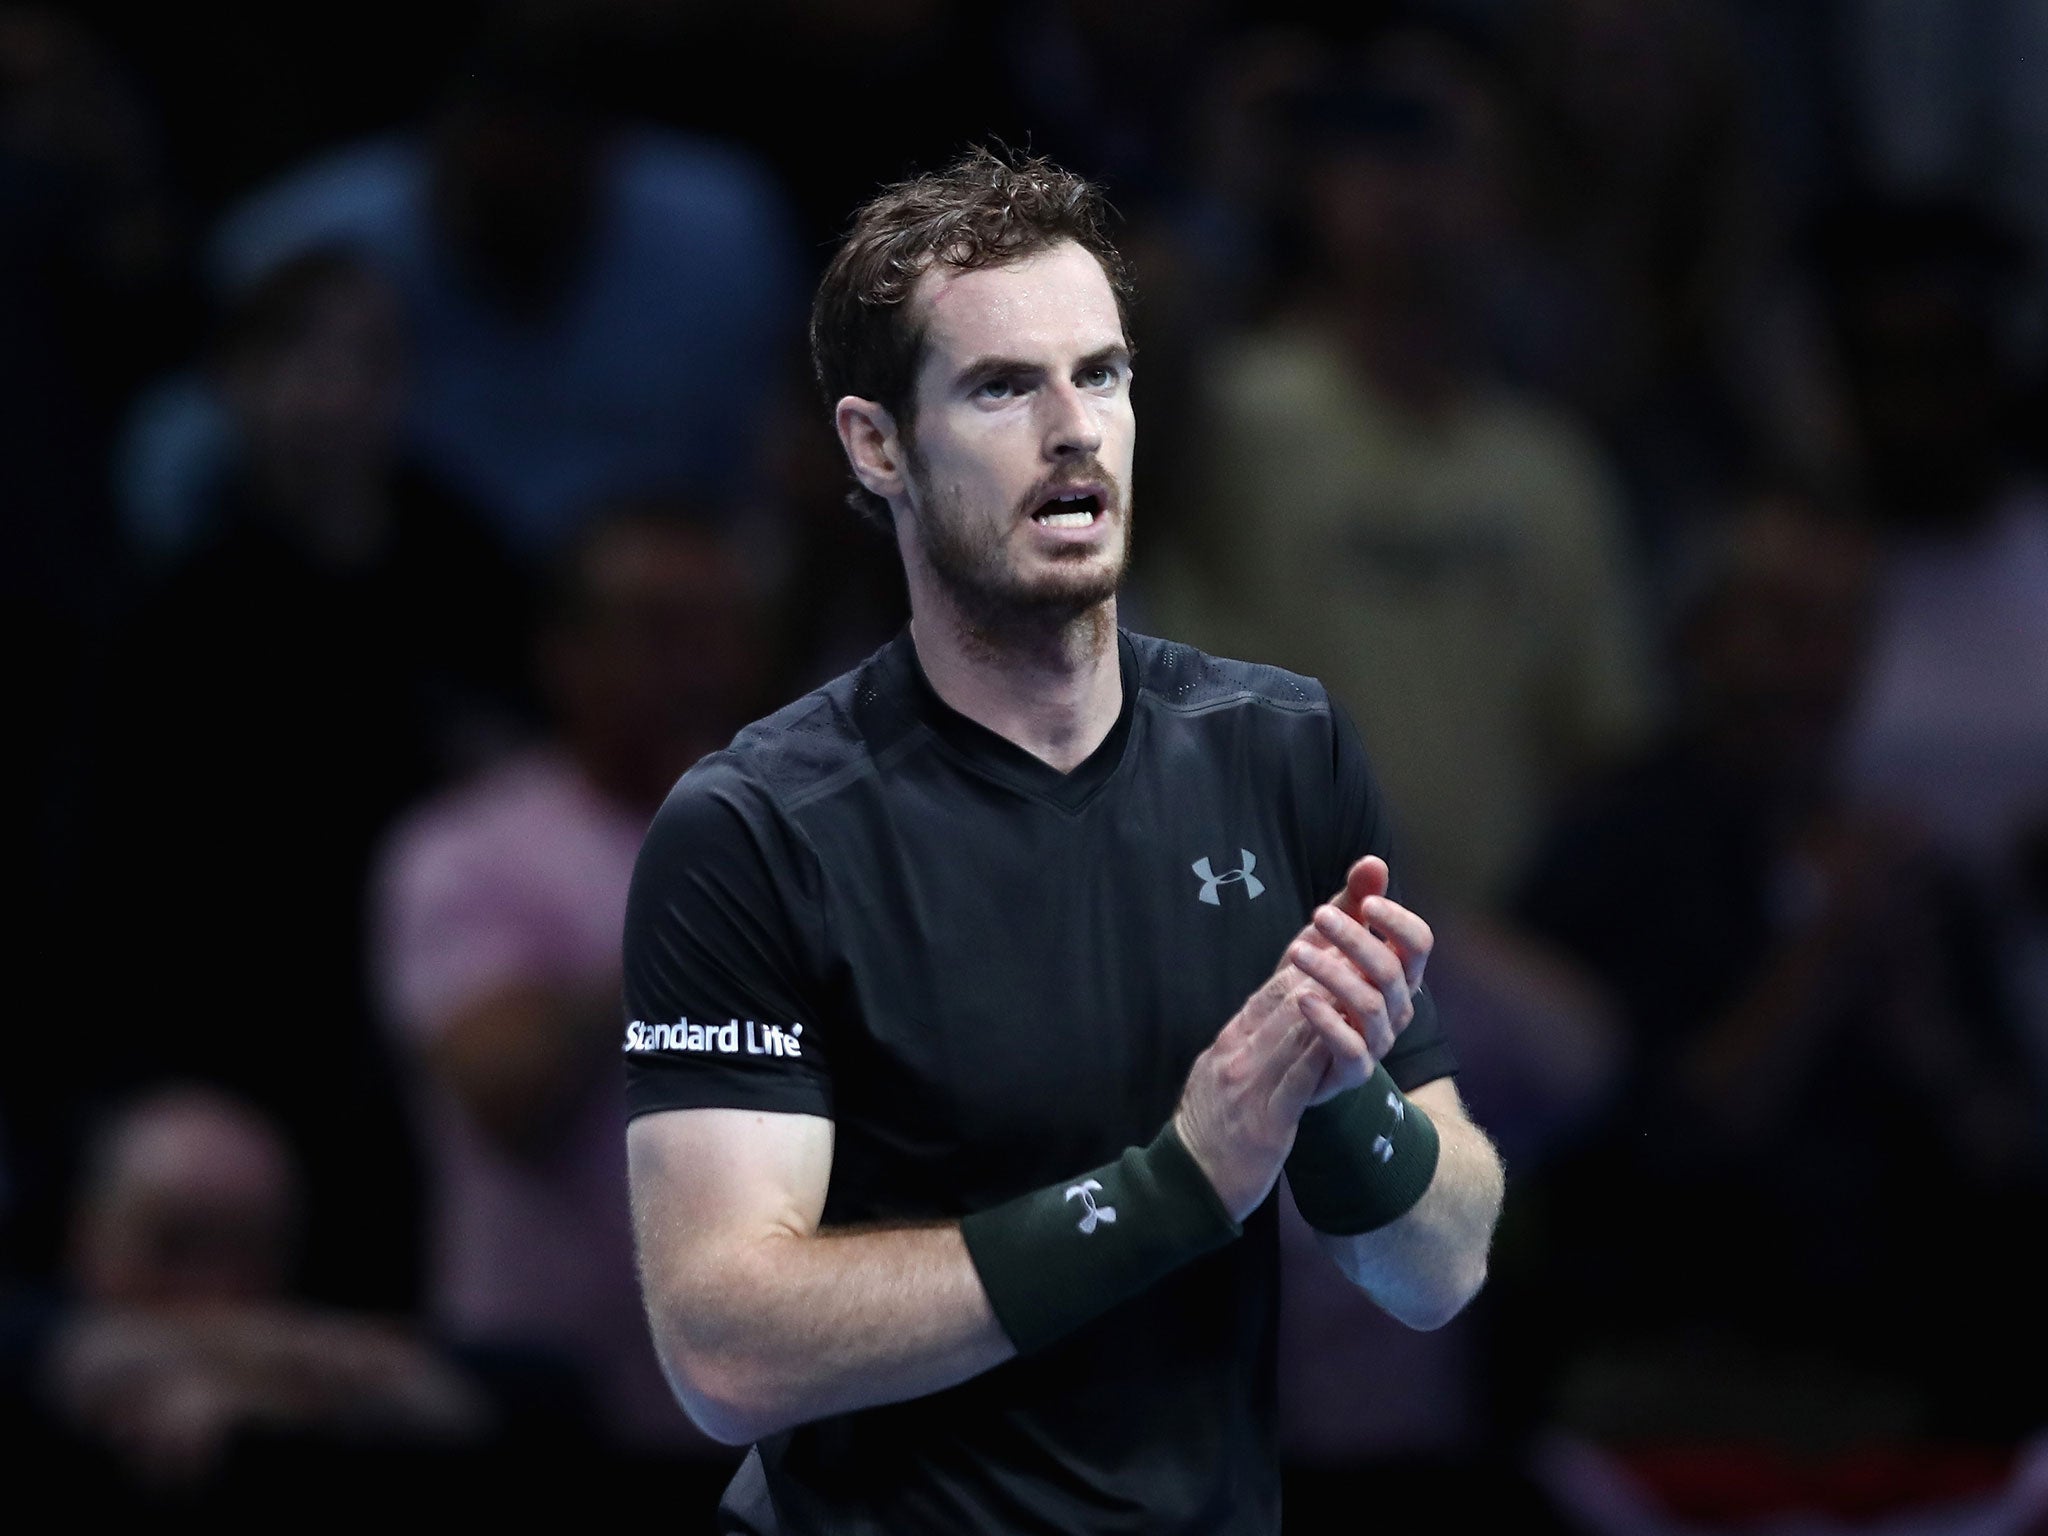 Murray is wary of facing Nishikori after seeing him beat Stan Wawrinka in his opening match